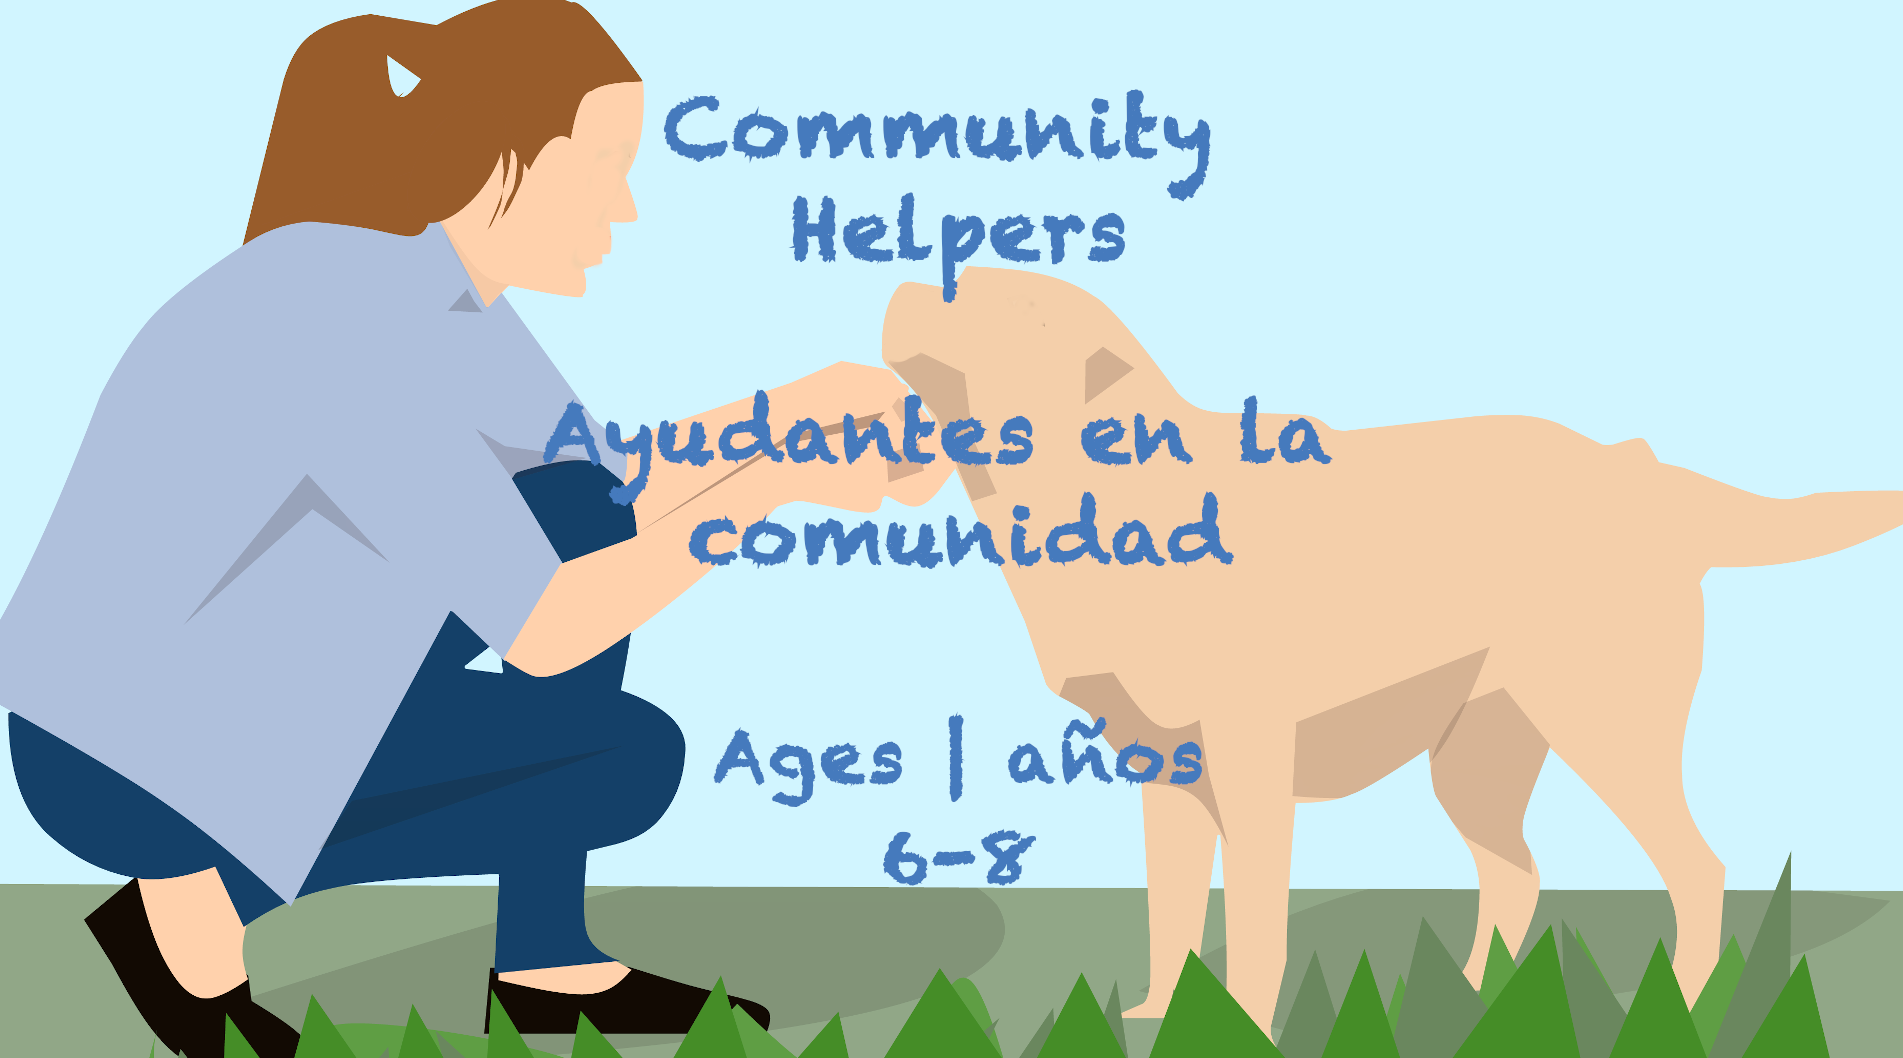 Community Helpers for 6-8 year olds